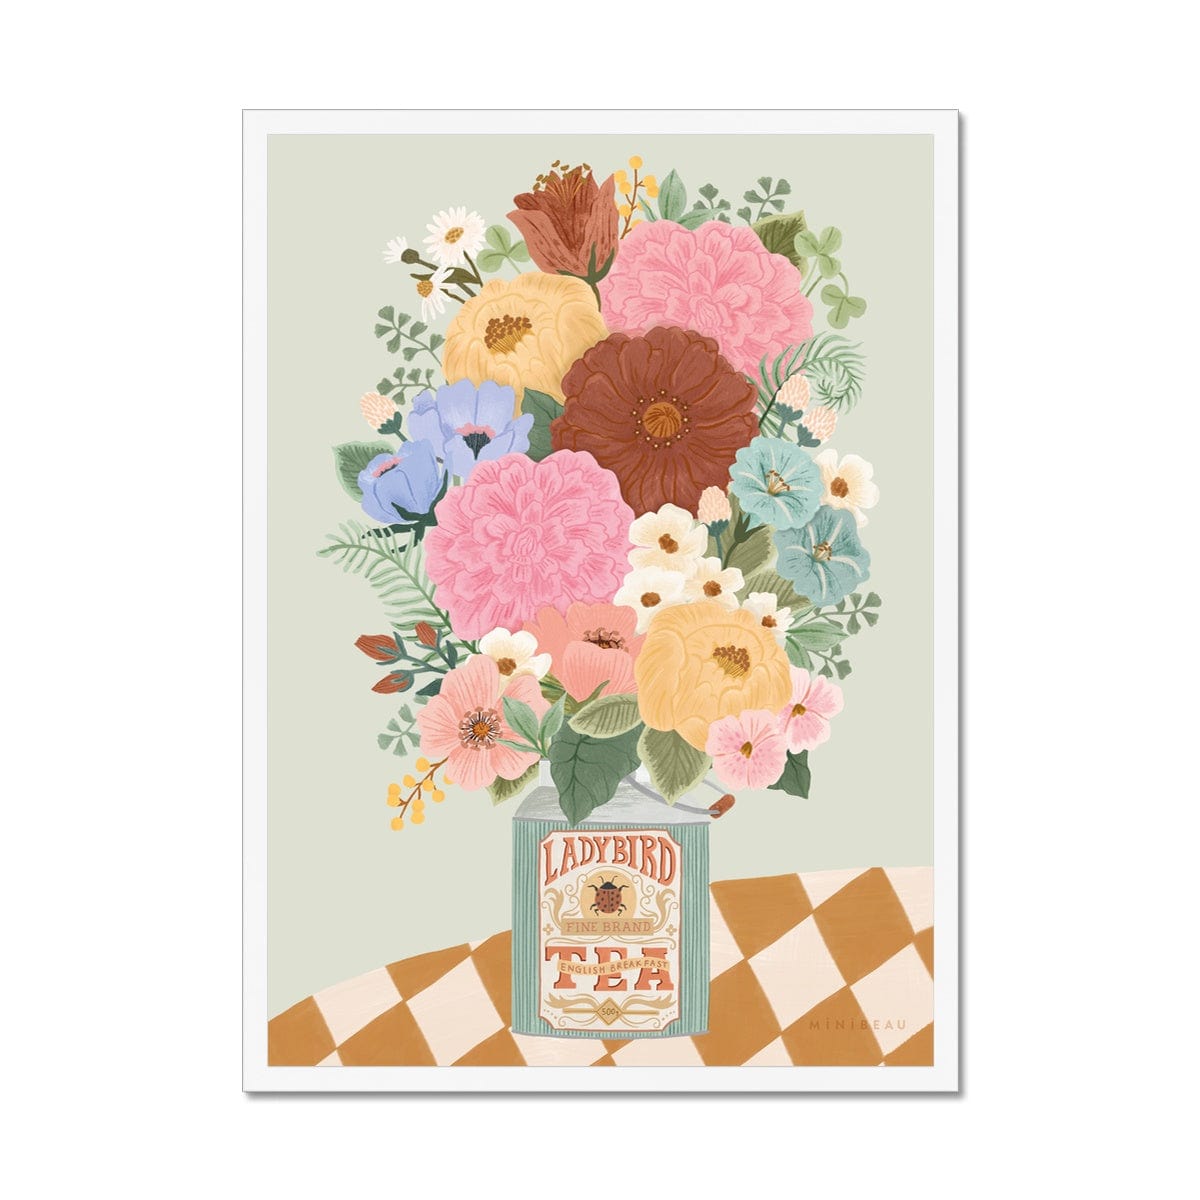 Art print in a white frame. Our boho floral art print consists of a bunch of flowers and foliage in a vintage square ladybird tea bottle on a table with a checked tablecloth on a light green background. The flowers are of varying types and come in shades of red, pink, purple, blue, yellow and cream.